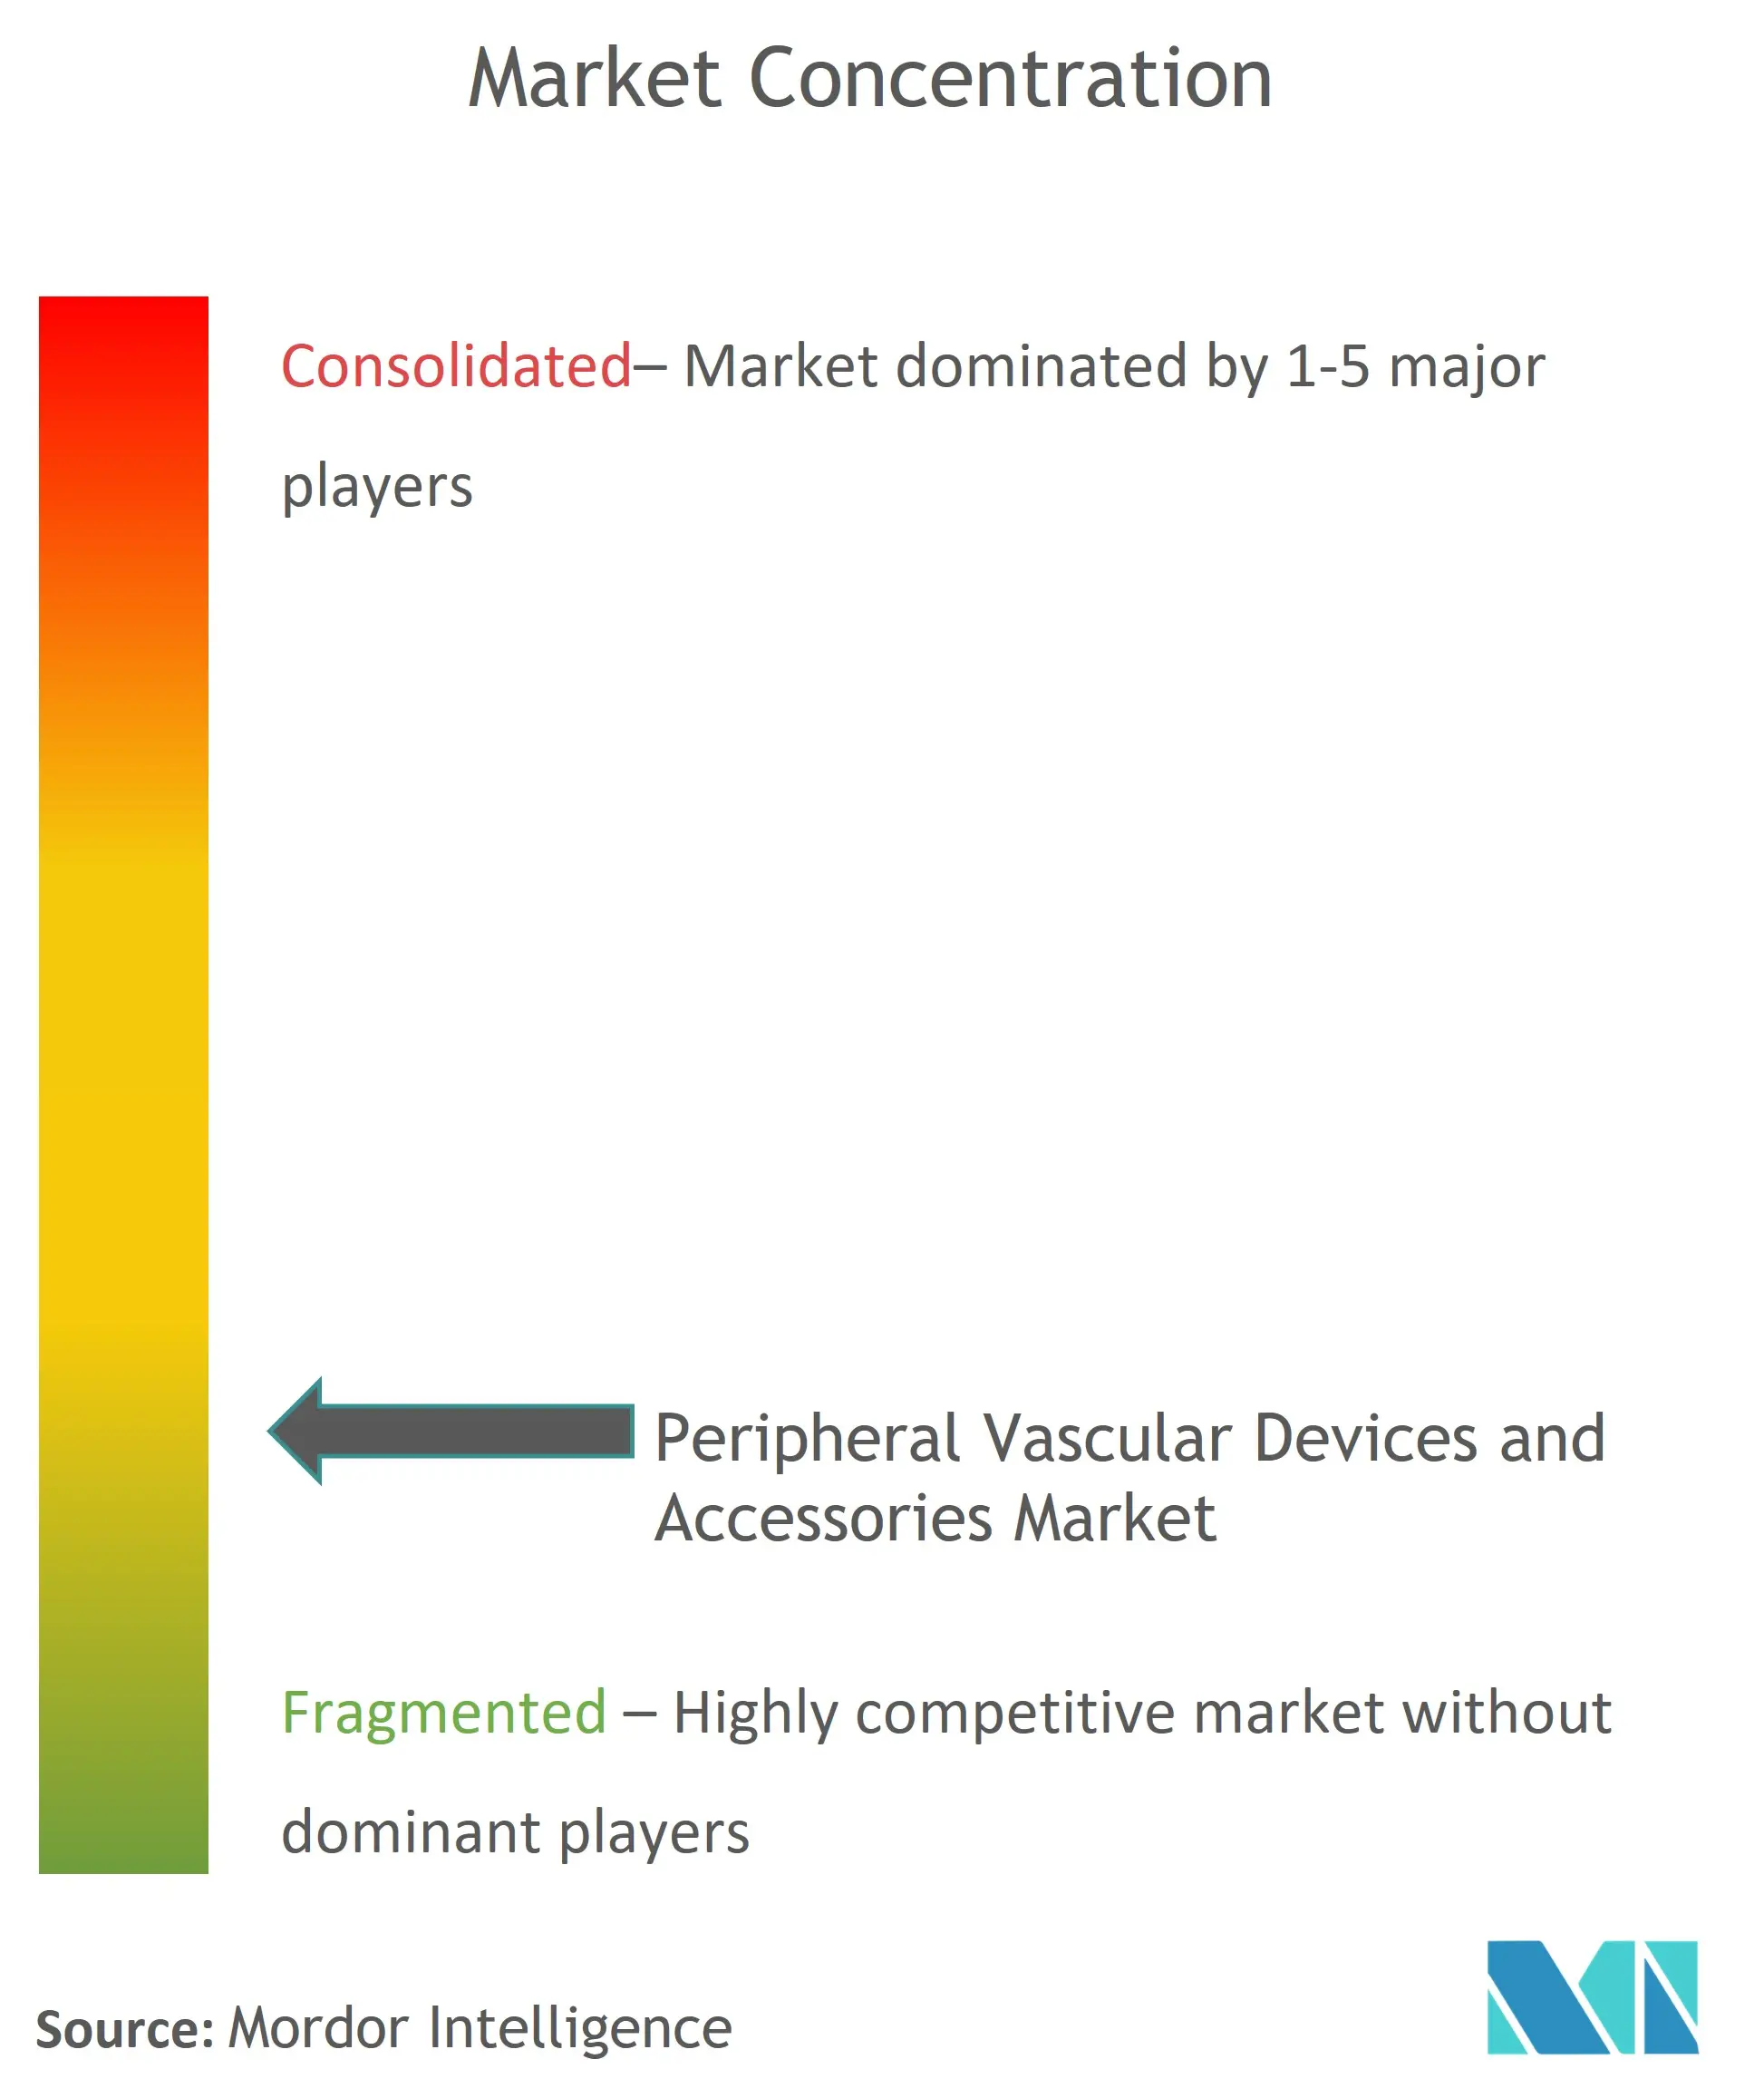 Global Peripheral Vascular Devices and Accessories Market Concentration